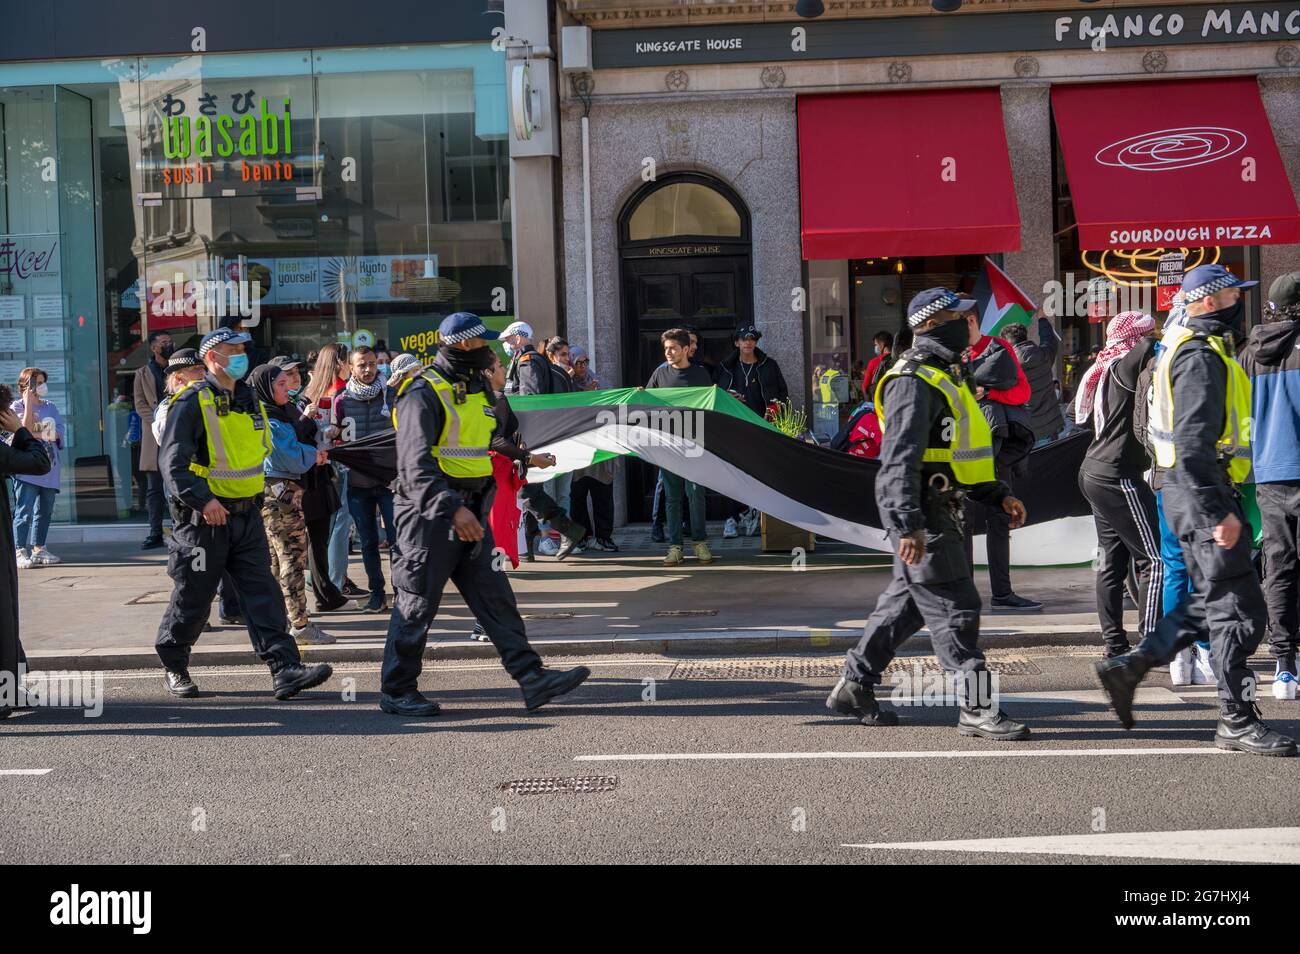 LONDON - MAY 29, 2021: British police officers walk alongside protesters at a Freedom for Palestine protest rally in London Stock Photo